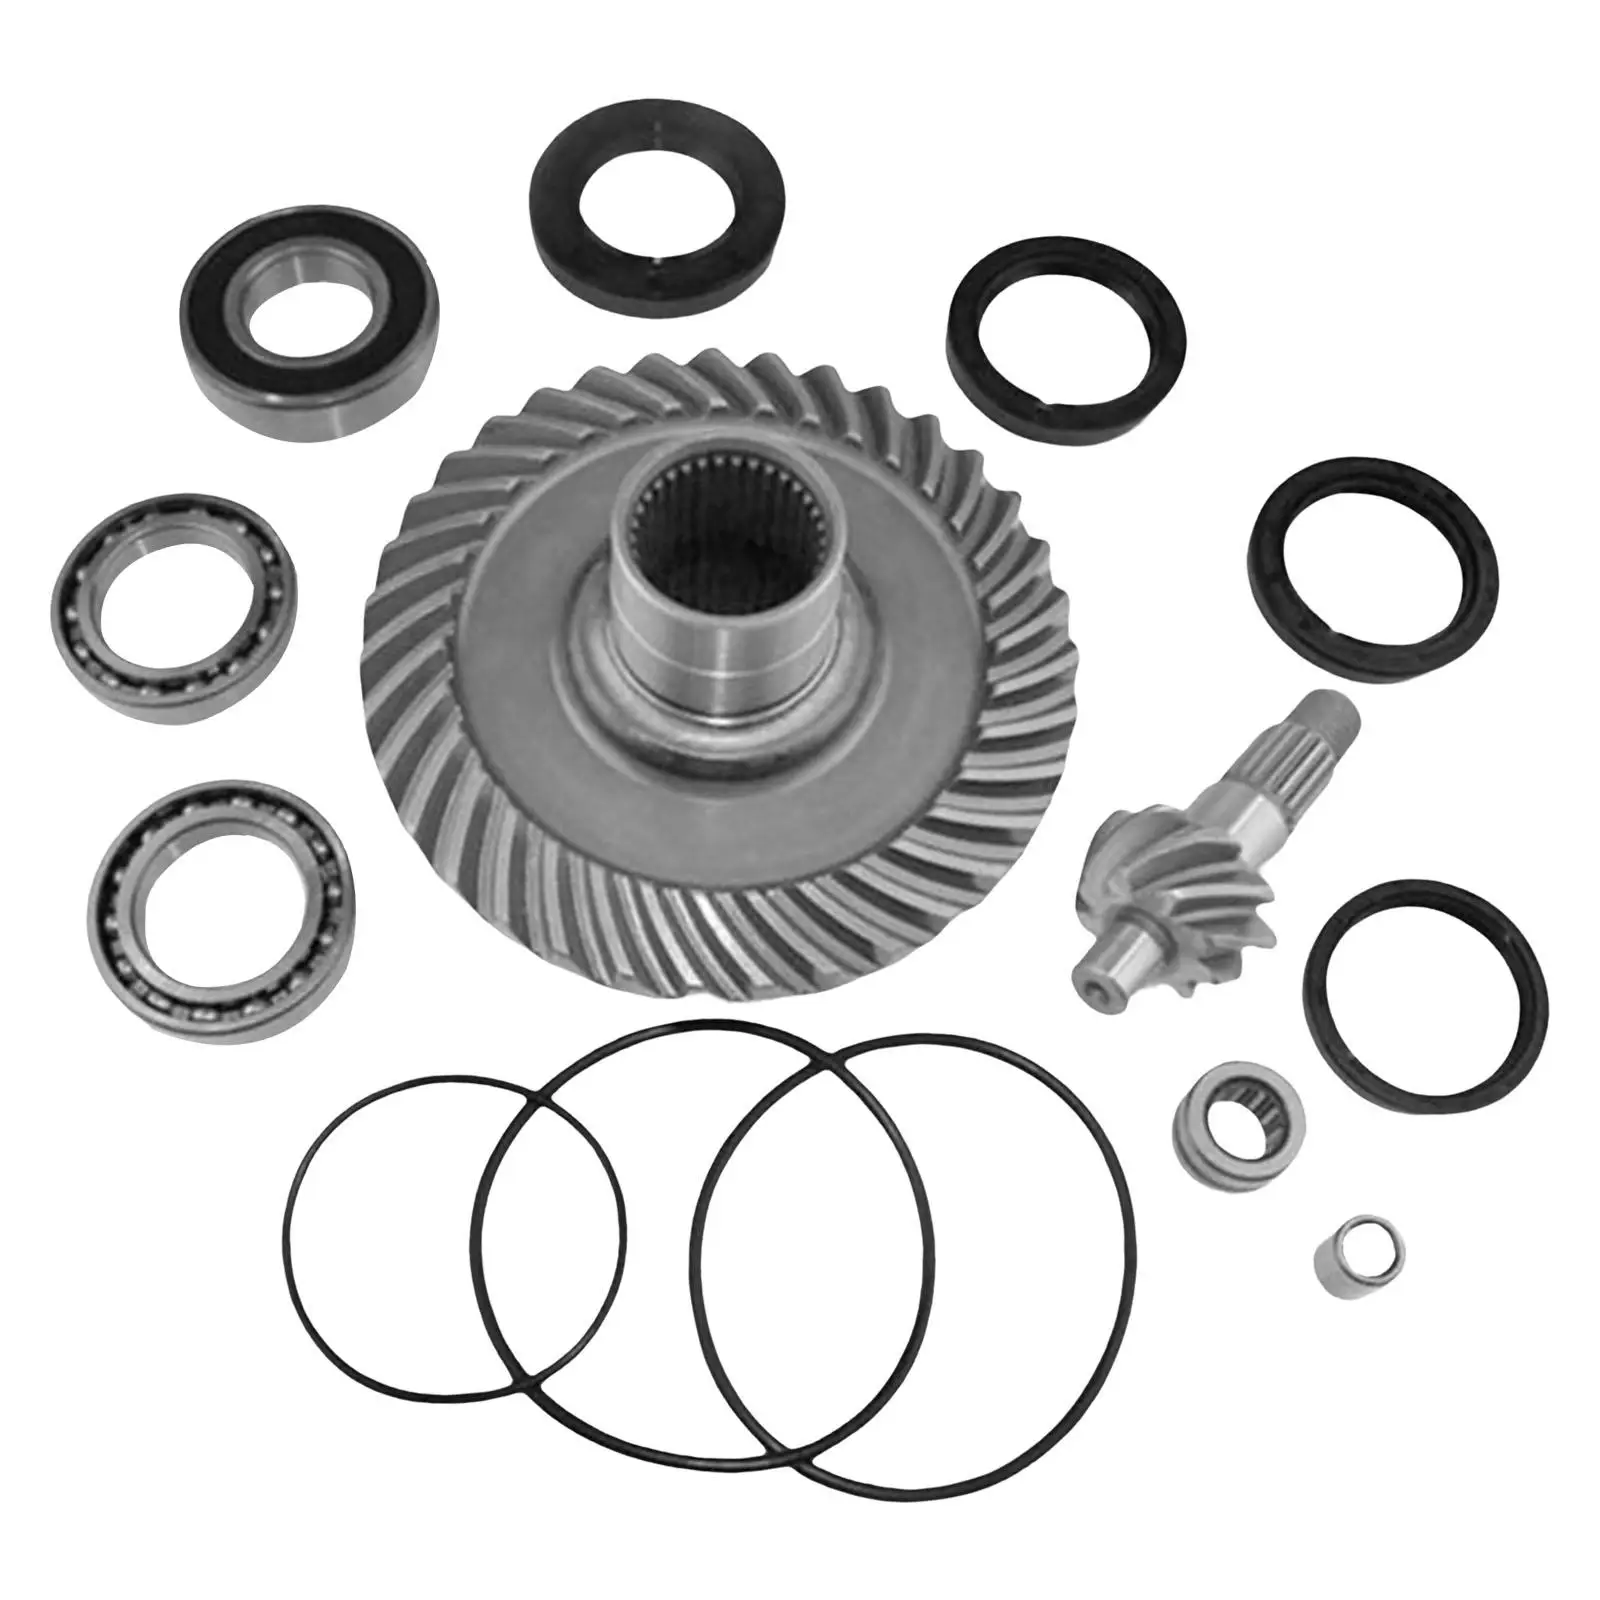 

Rear Differential Ring & Pinion Kit, Parts 127447 Fits for Honda TRX300 300 Fourtrax 4x4 1988-2000/